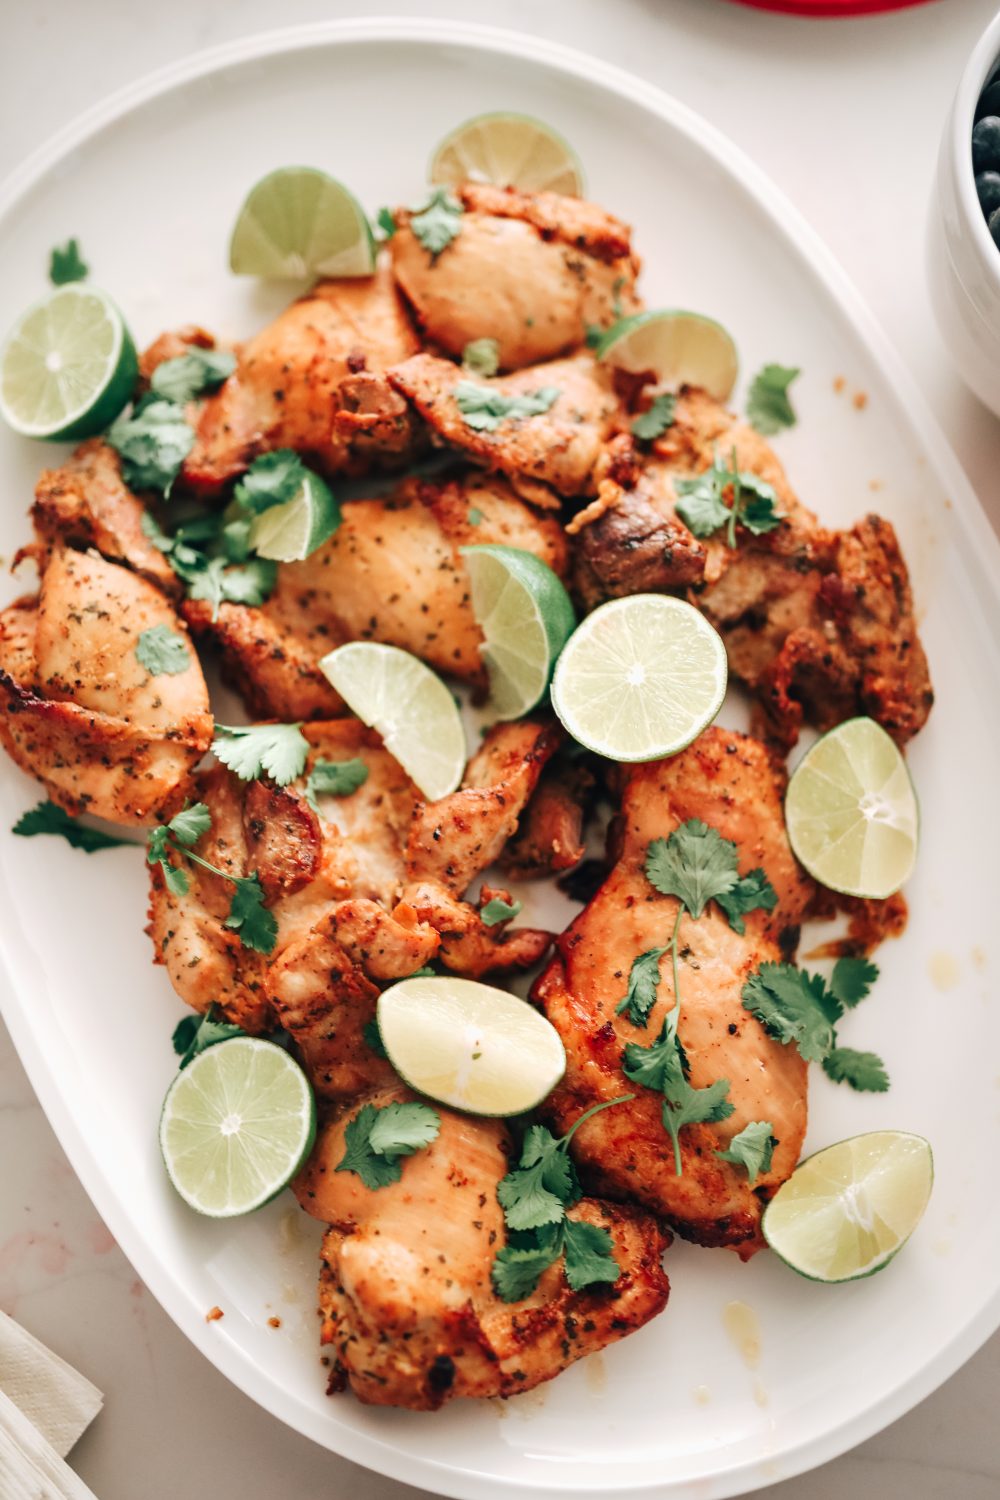 Cilantro Lime Chicken Thighs